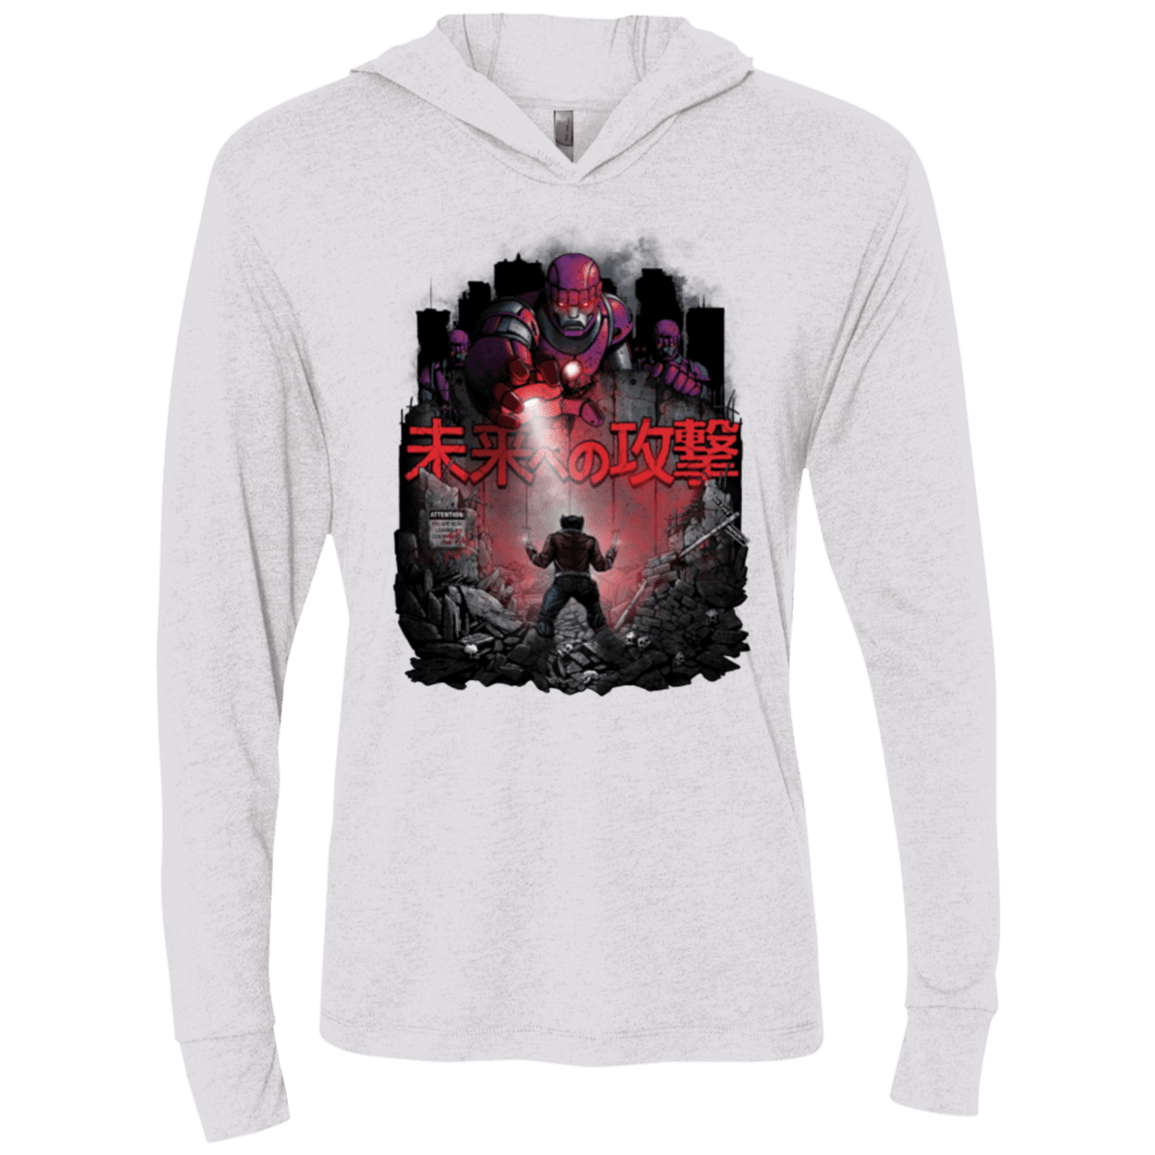 T-Shirts Heather White / X-Small Attack On The Future Triblend Long Sleeve Hoodie Tee